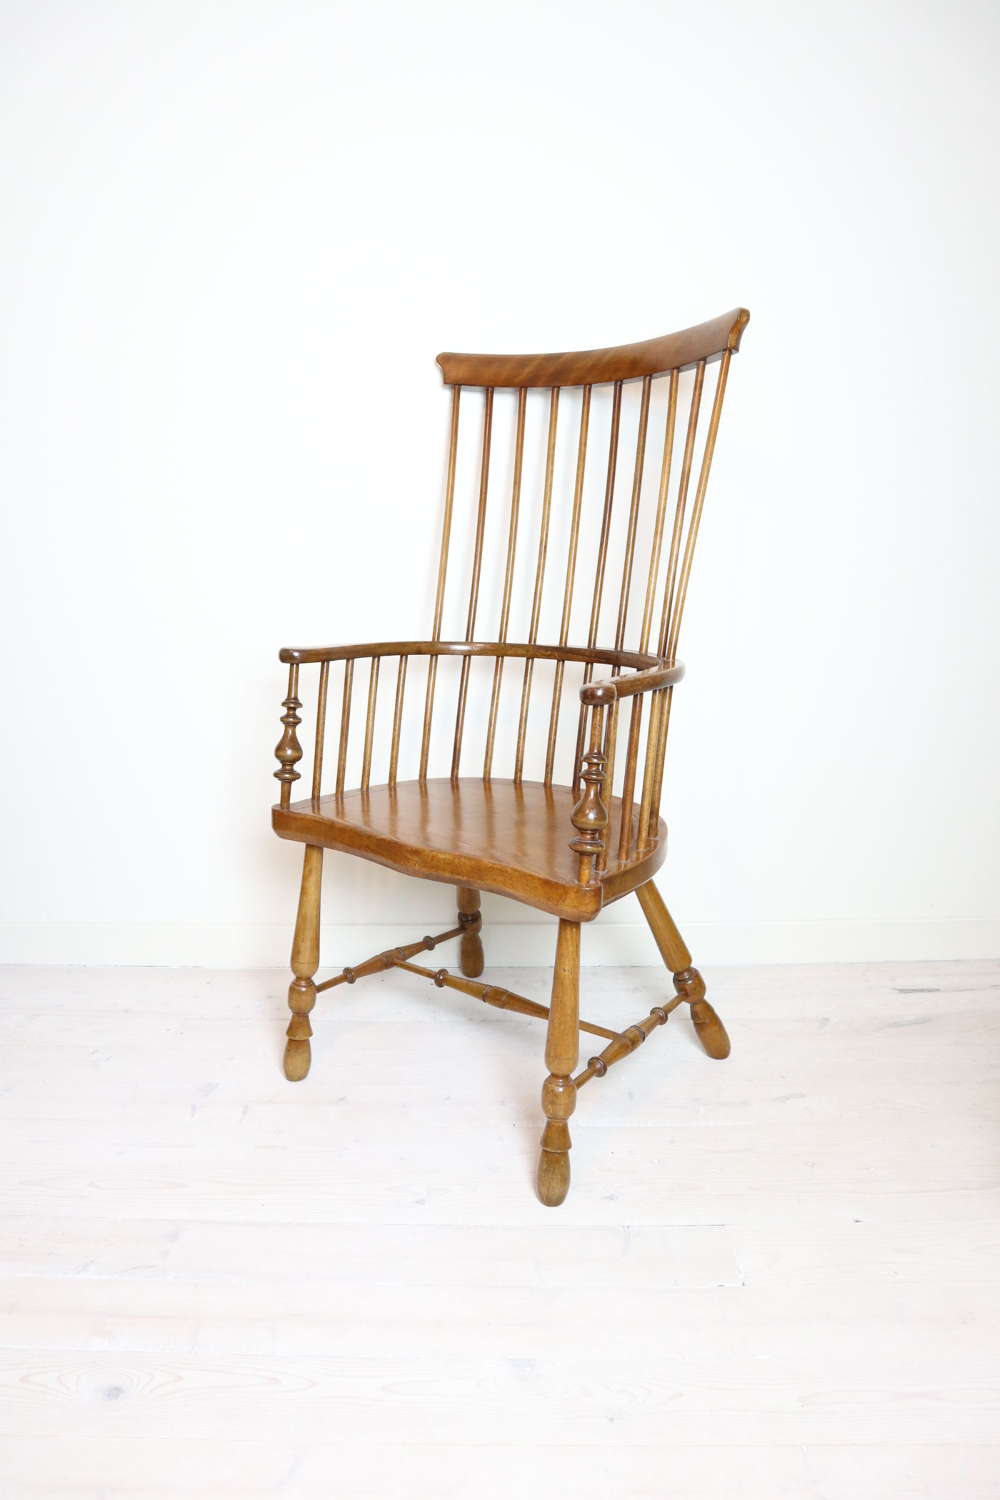 Late 19th Century Scottish Darvel High Comb-backed Windsor Chair